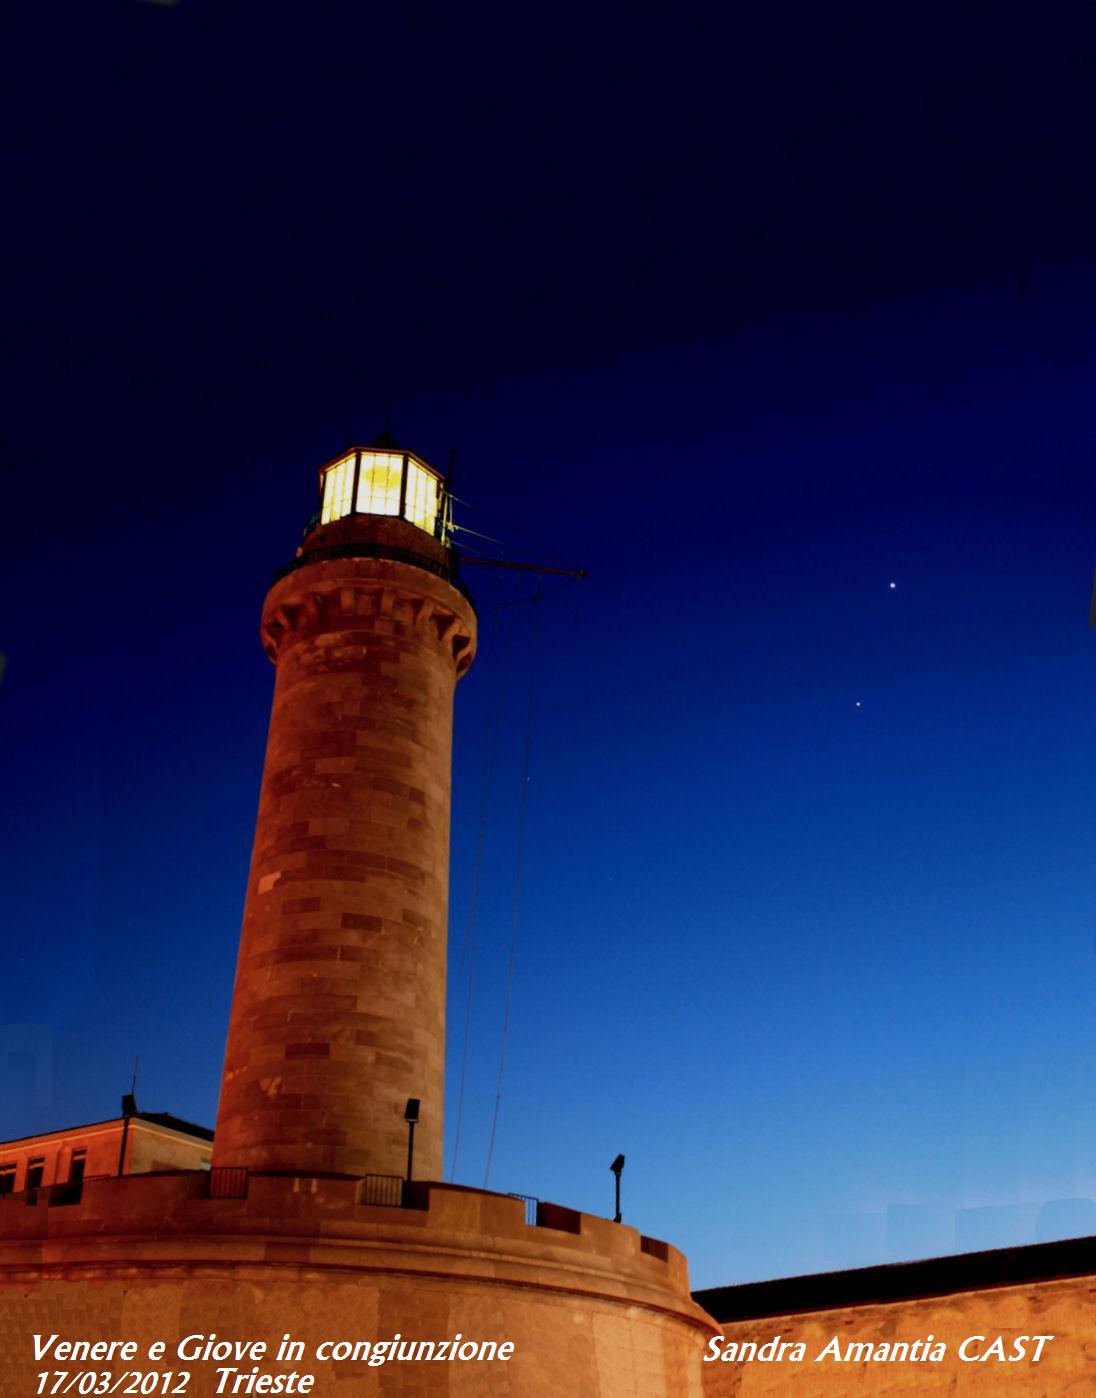 Venus in conjunction with Jupiter near the Trieste lighthouse: 91 KB; click on the image to enlarge at 2000x1955 pixels